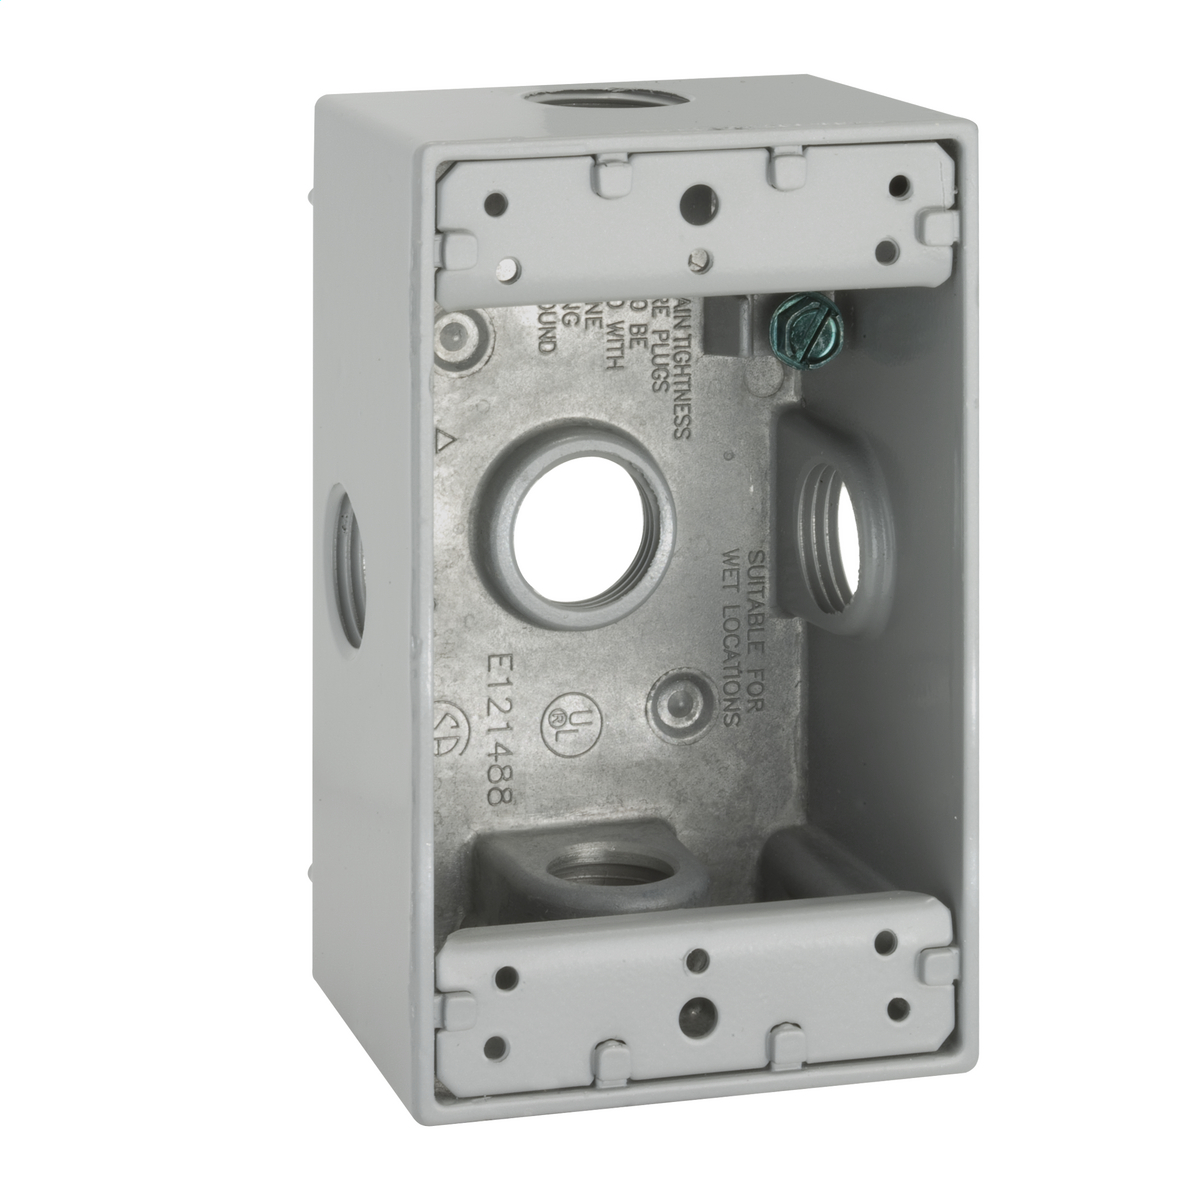 BELL 5323-0 WP BOX 1G 5-1/2 OUTLETS GRAY 1-HOLE TOP-BOTTOM-SIDE